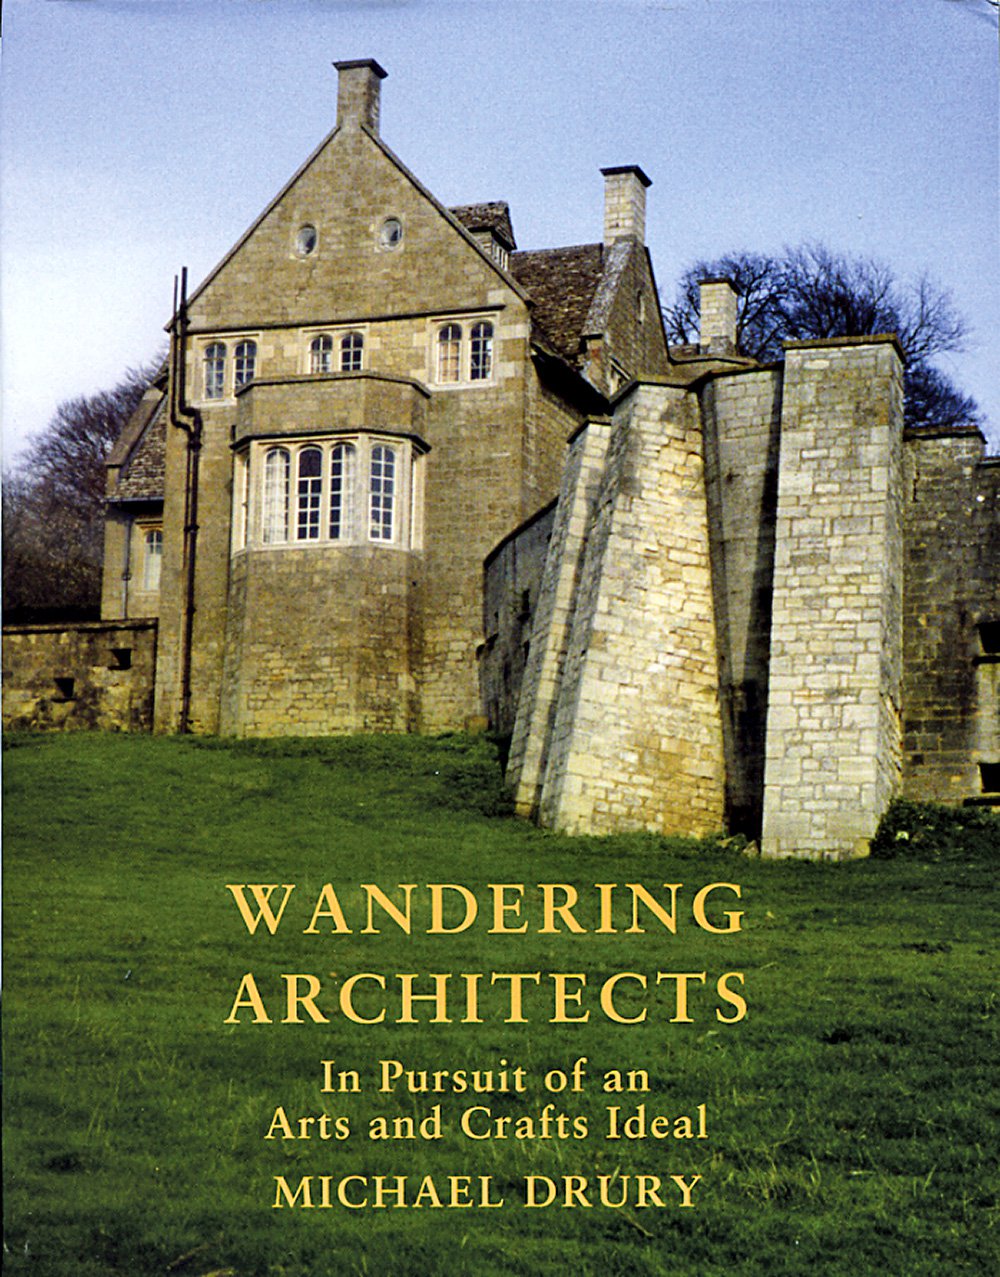 Michael Drury. Wandering Architects: In Pursuit of an Arts and Crafts Ideal. Shaun Tyas. 308 c. €35. На английском языке